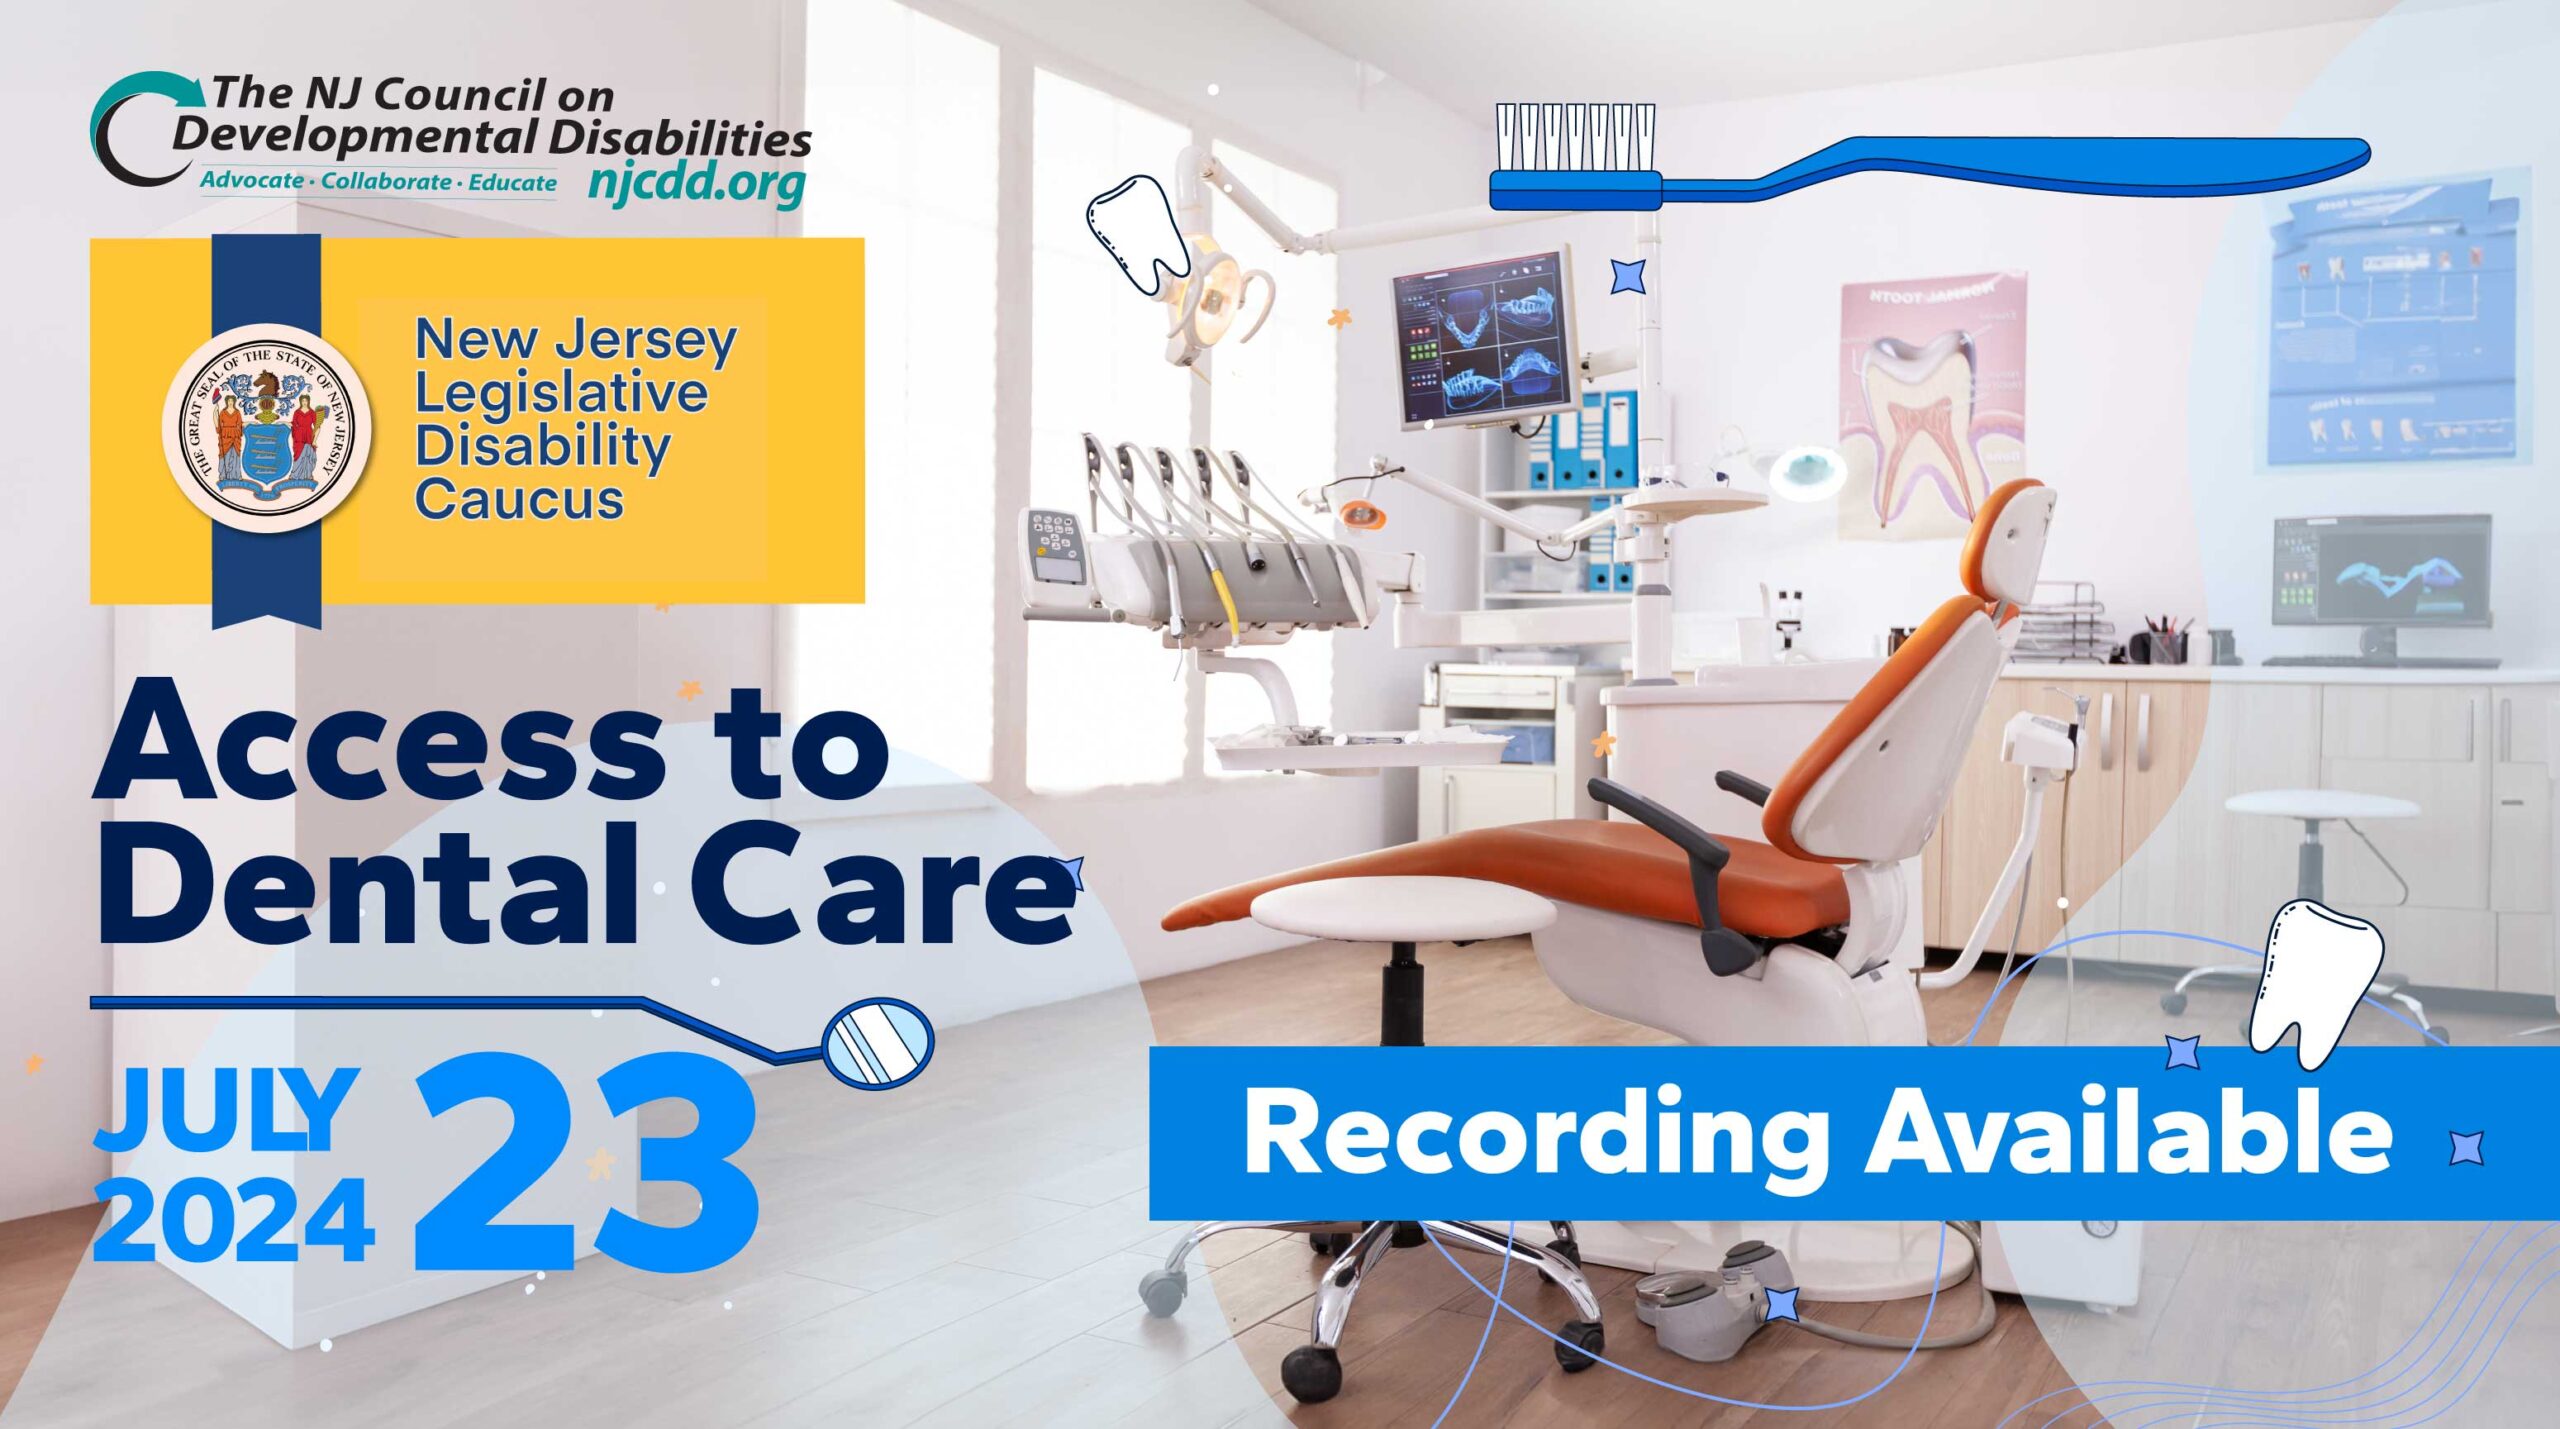 Access to Dental Care - July 23.2024-Recording